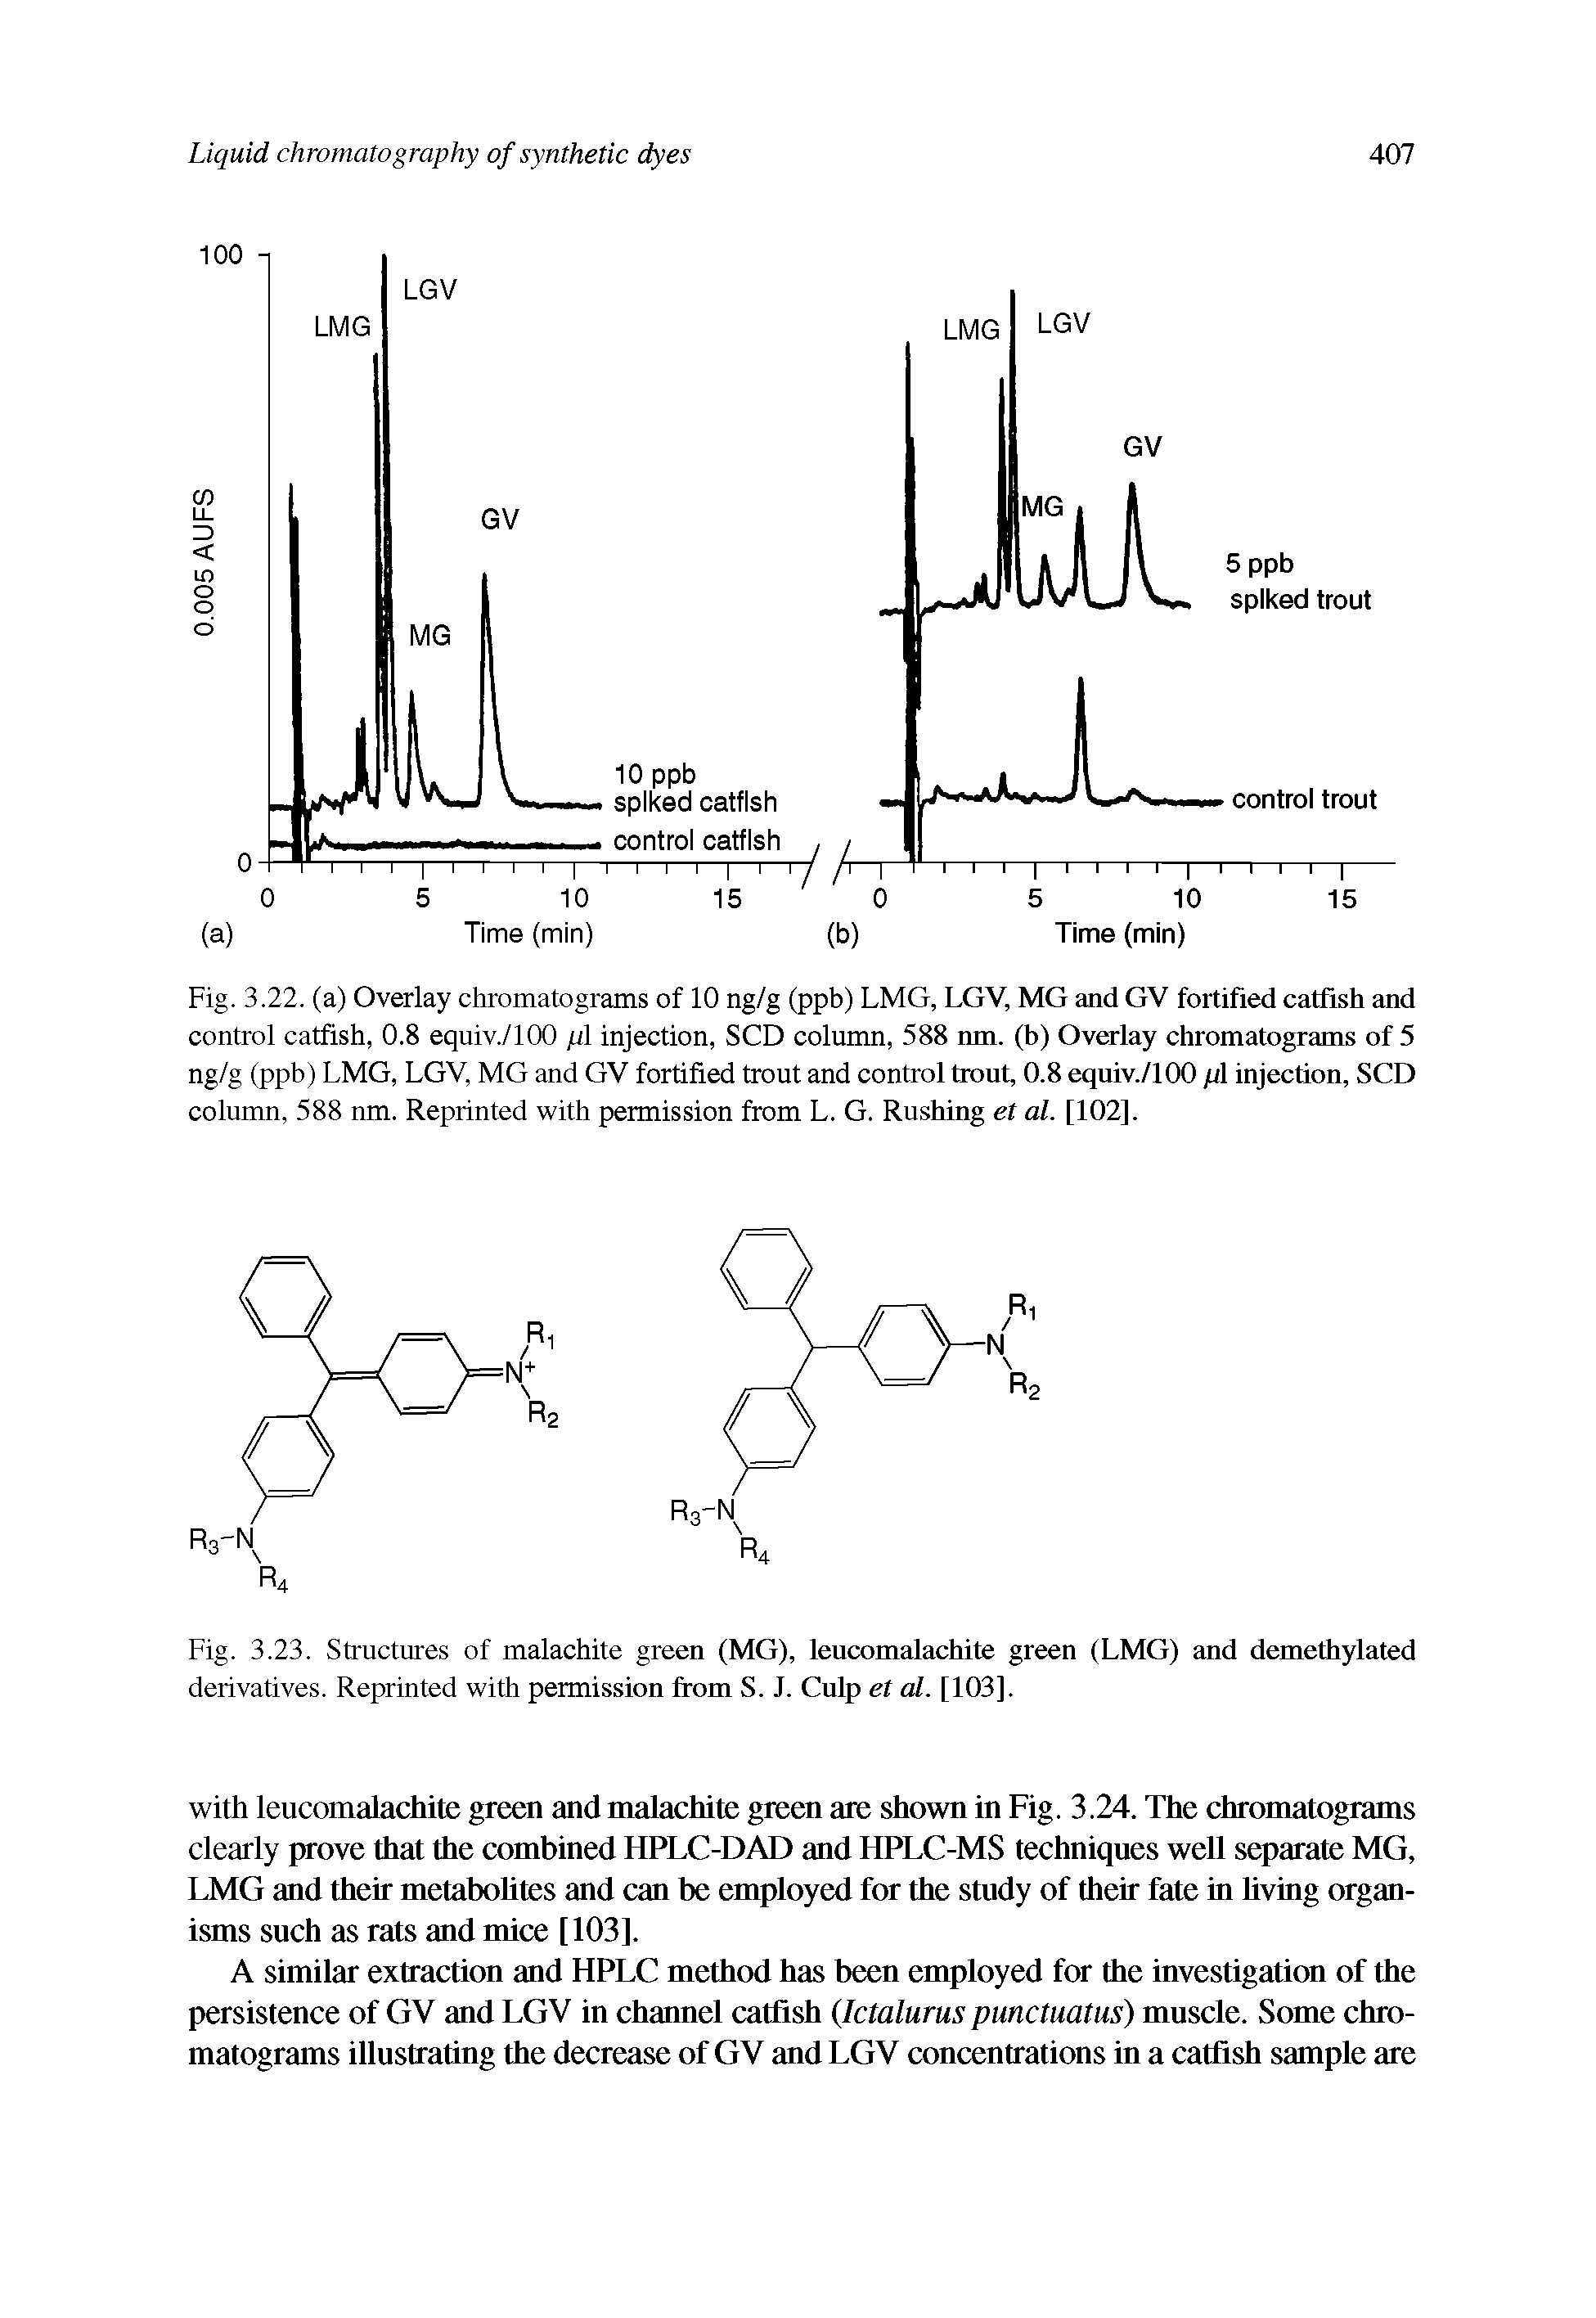 Fig. 3.23. Structures of malachite green (MG), leucomalachite green (LMG) and demethylated derivatives. Reprinted with permission from S. J. Culp et al. [103].